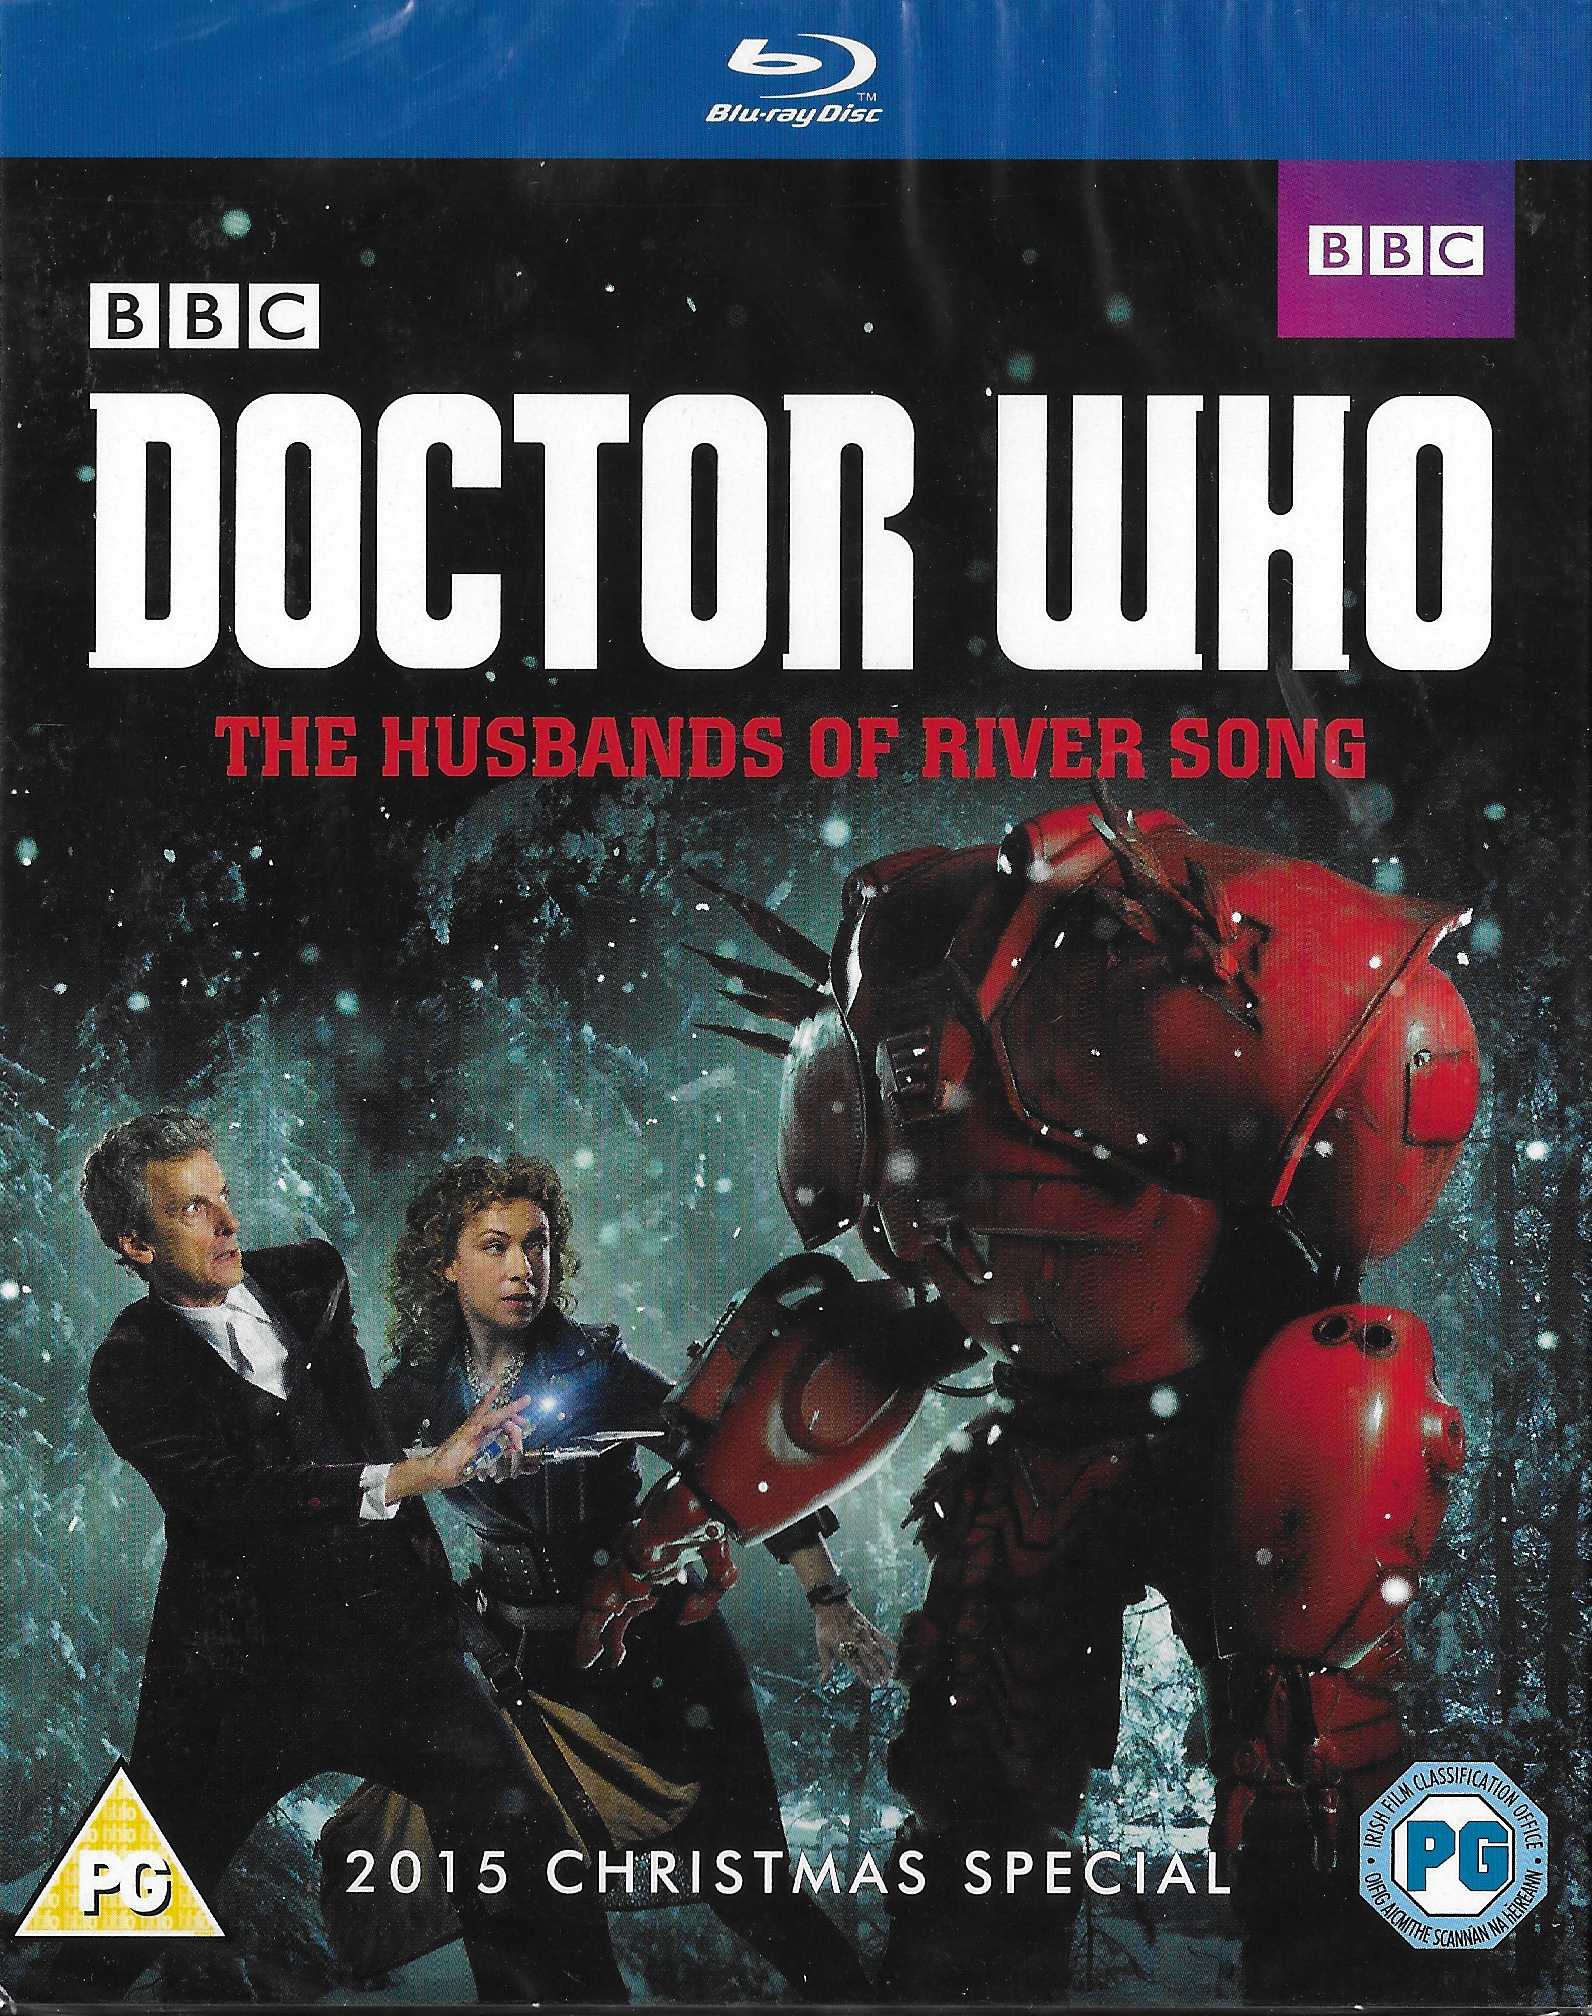 Picture of BBCBD 0332 Doctor Who - The husbands of River Song (2015 Christmas special) by artist Steven Moffat from the BBC blu-rays - Records and Tapes library